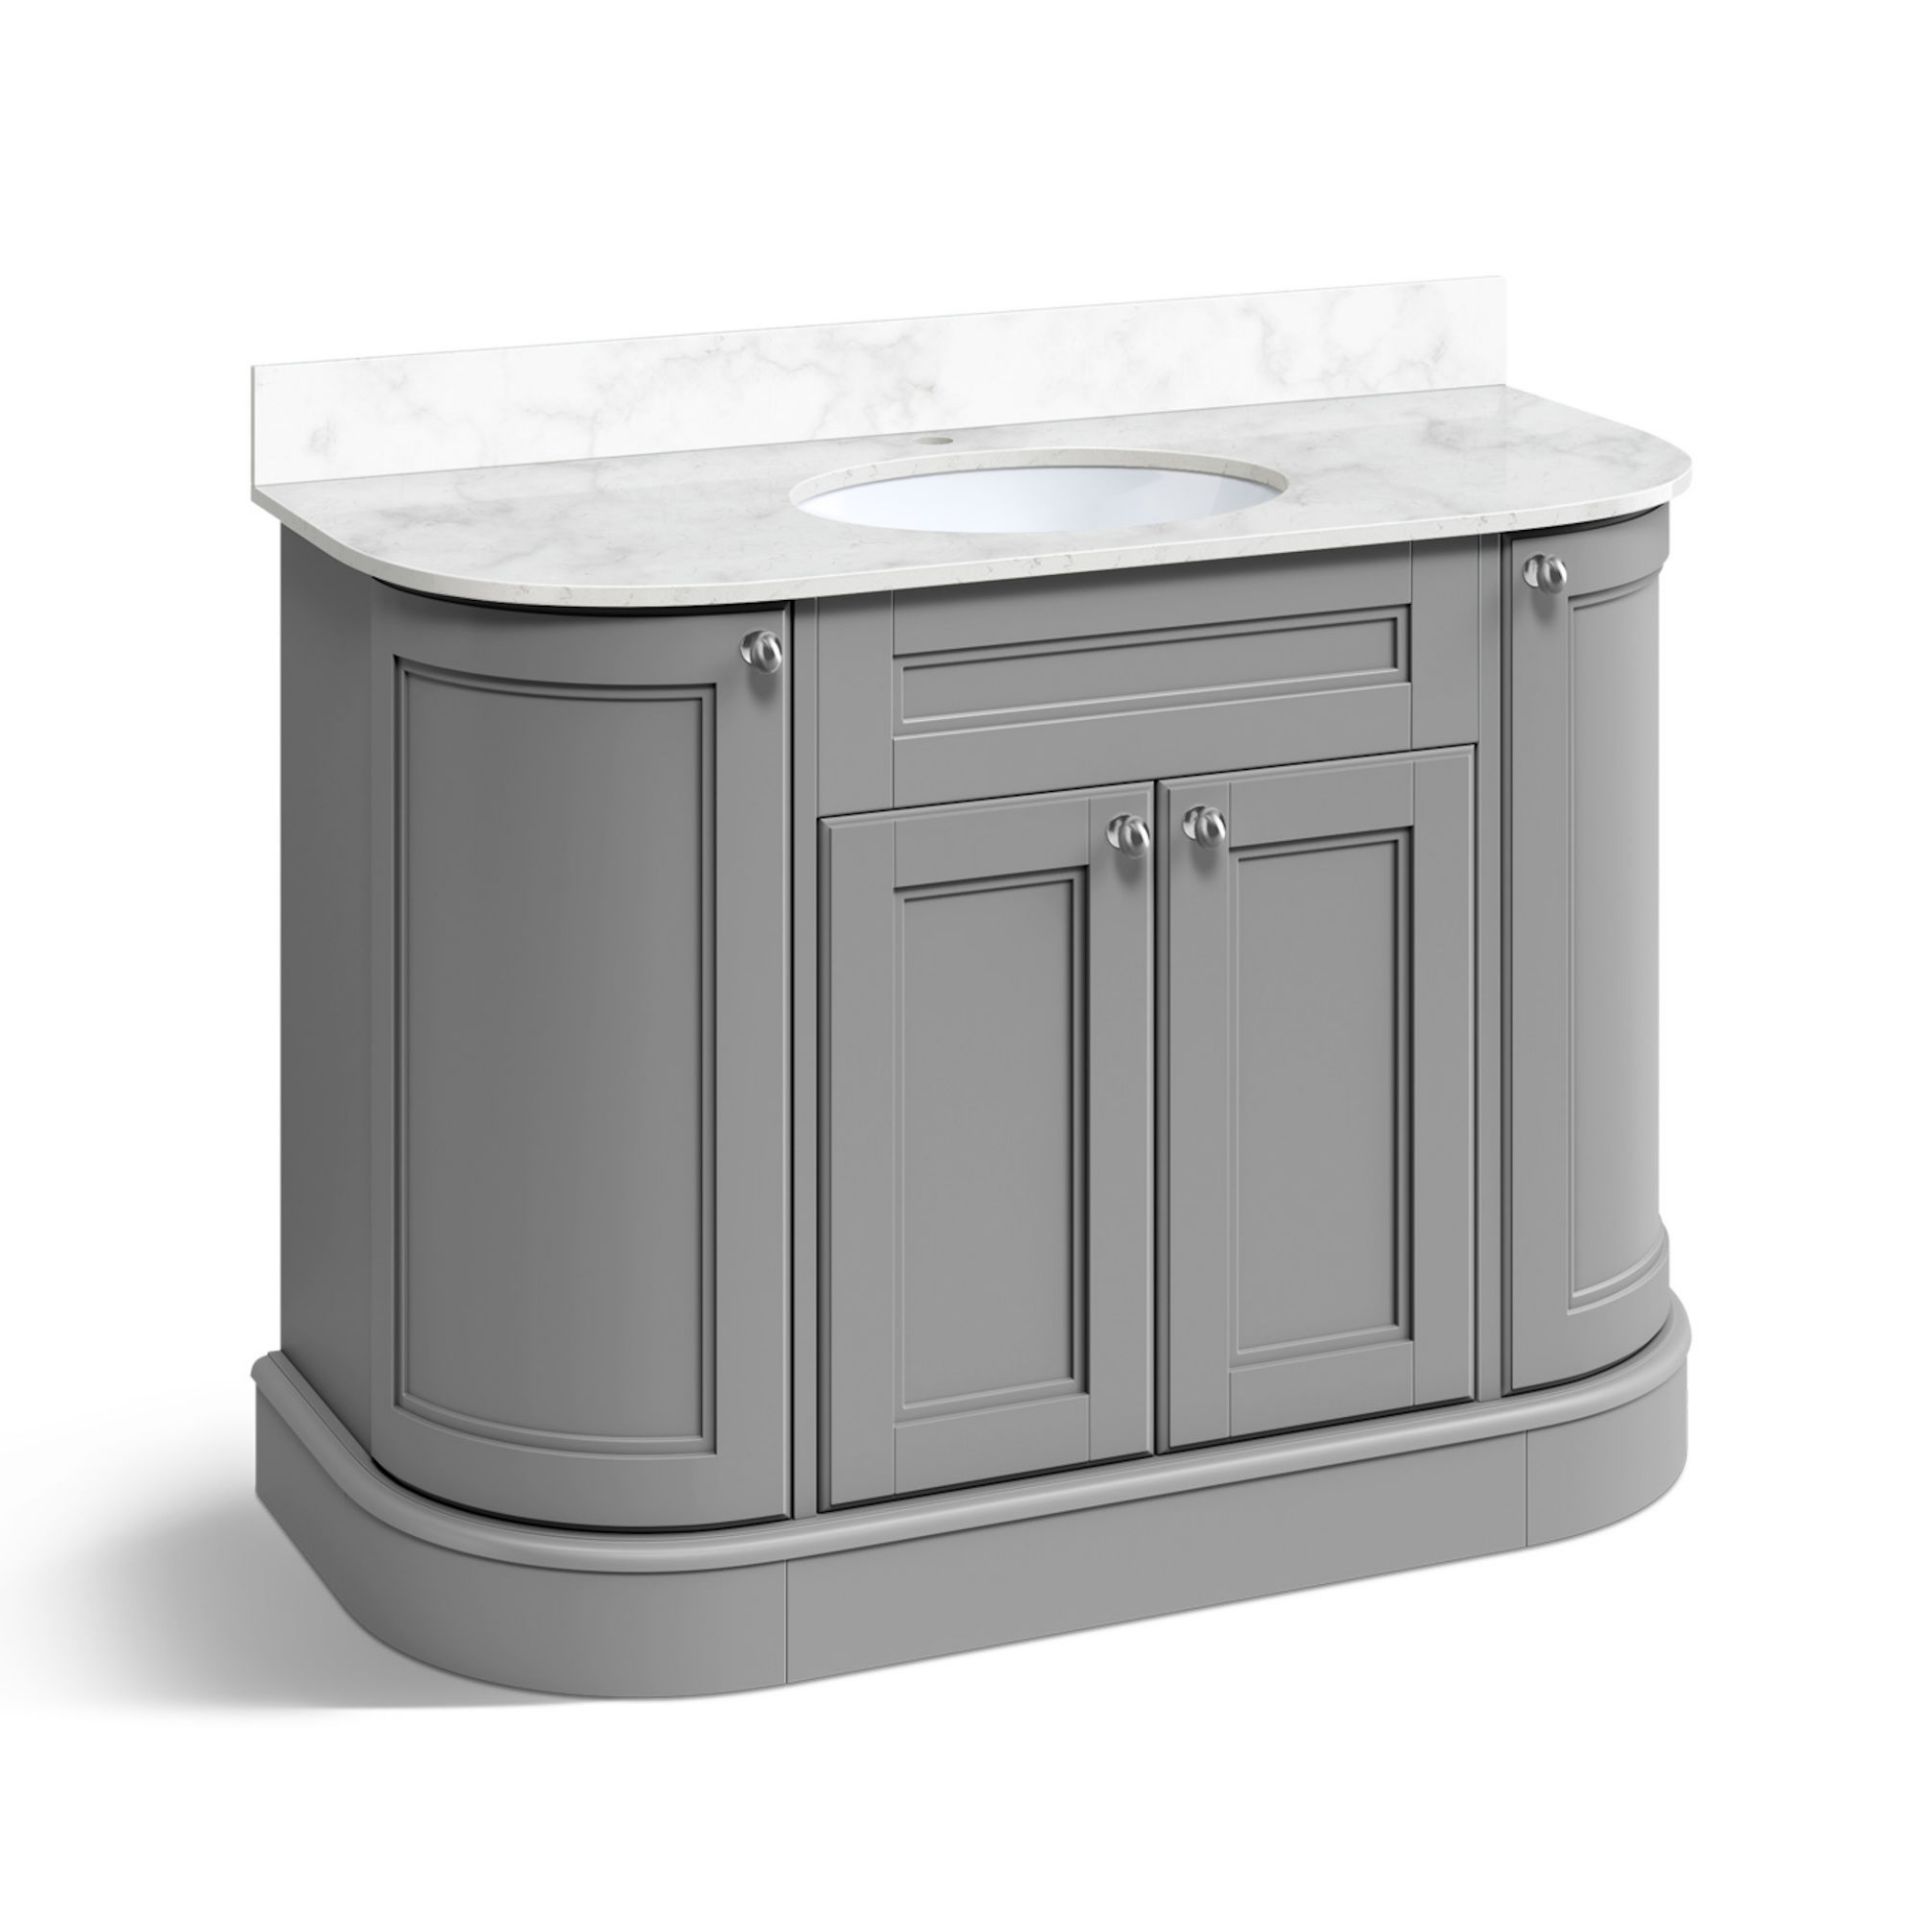 NEW & BOXED 1200mm York Earl Grey Vanity Unit. RRP £3,499.Comes complete with countertop and ... - Image 5 of 5